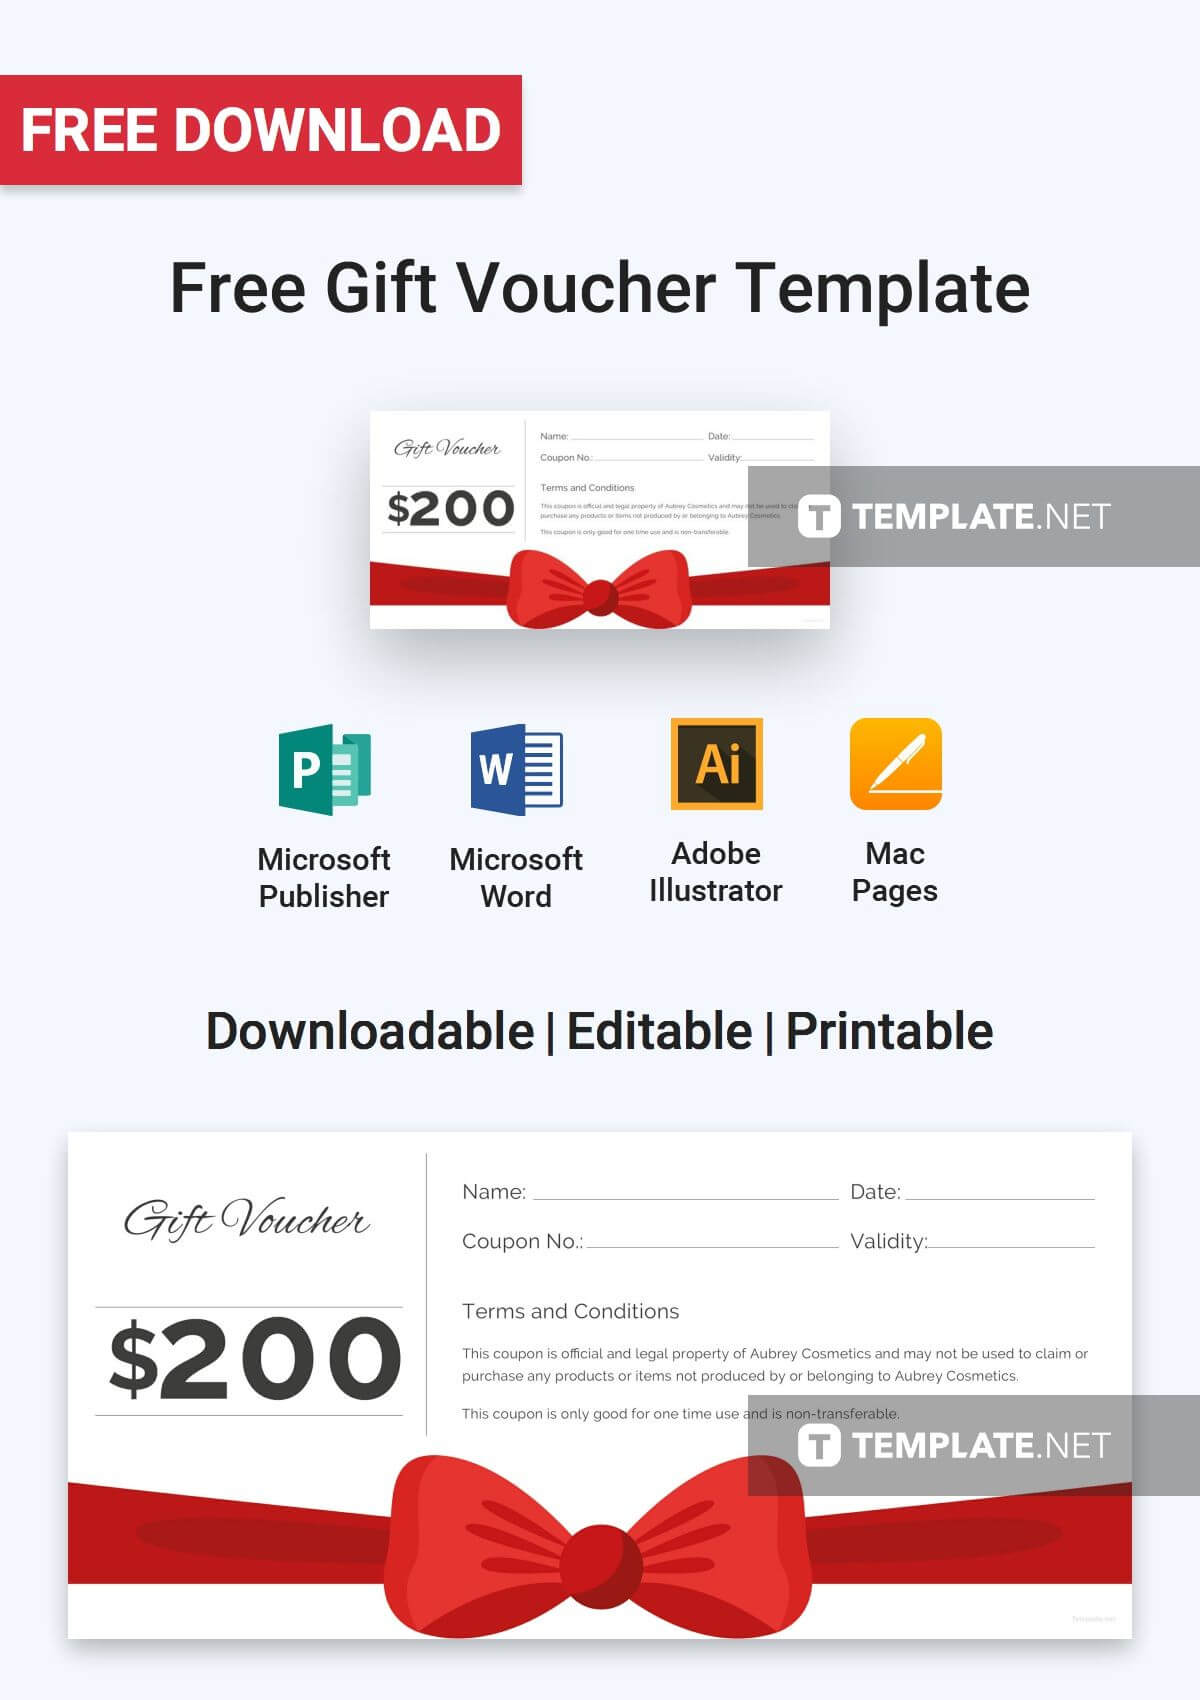 Free Gift Voucher | Free Voucher Templates | Free Gift For Microsoft Gift Certificate Template Free Word